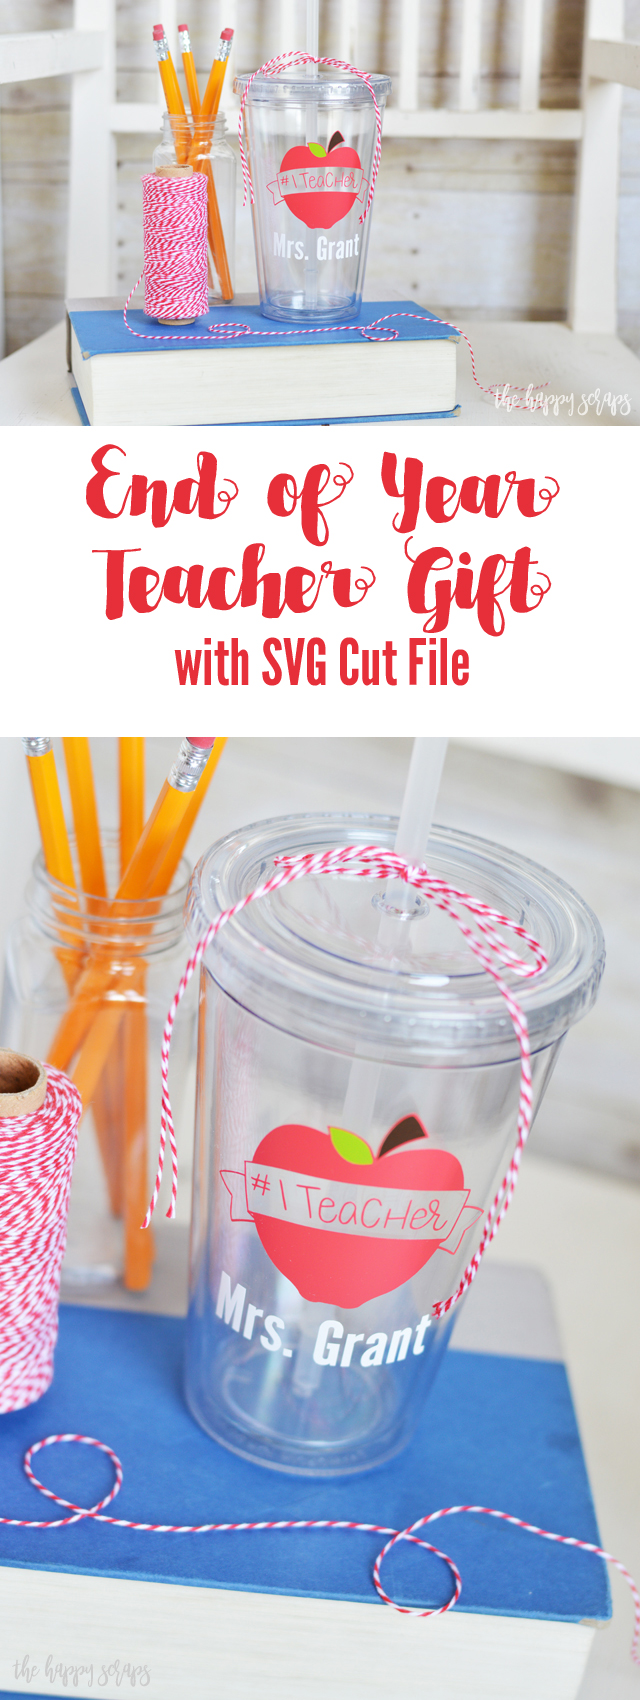 Putting together this End of Year Teacher Gift with SVG Cut File is easy + quick to do. Get all the details for creating your own and the link to the SVG file in the post. 